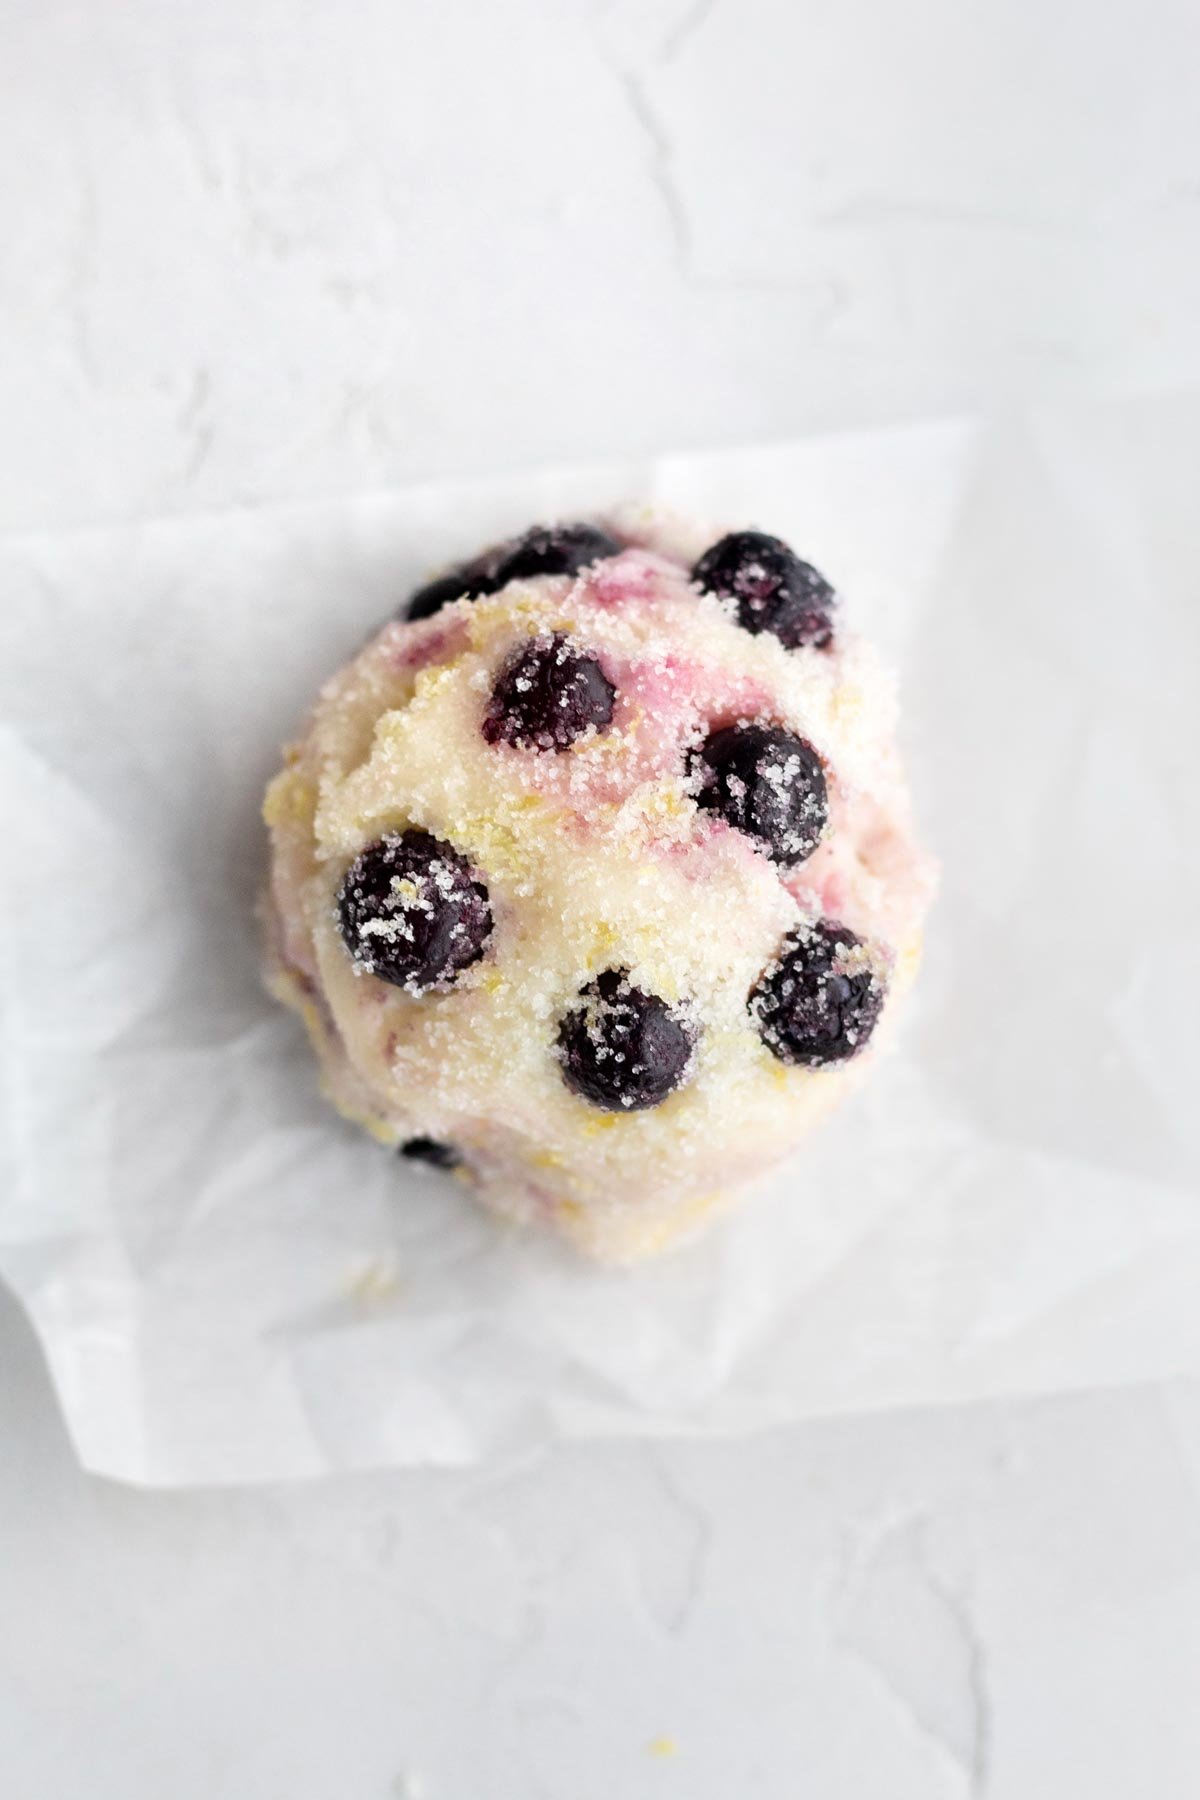 A scooped ball of Lemon Blueberry Cookies with regular blueberries.